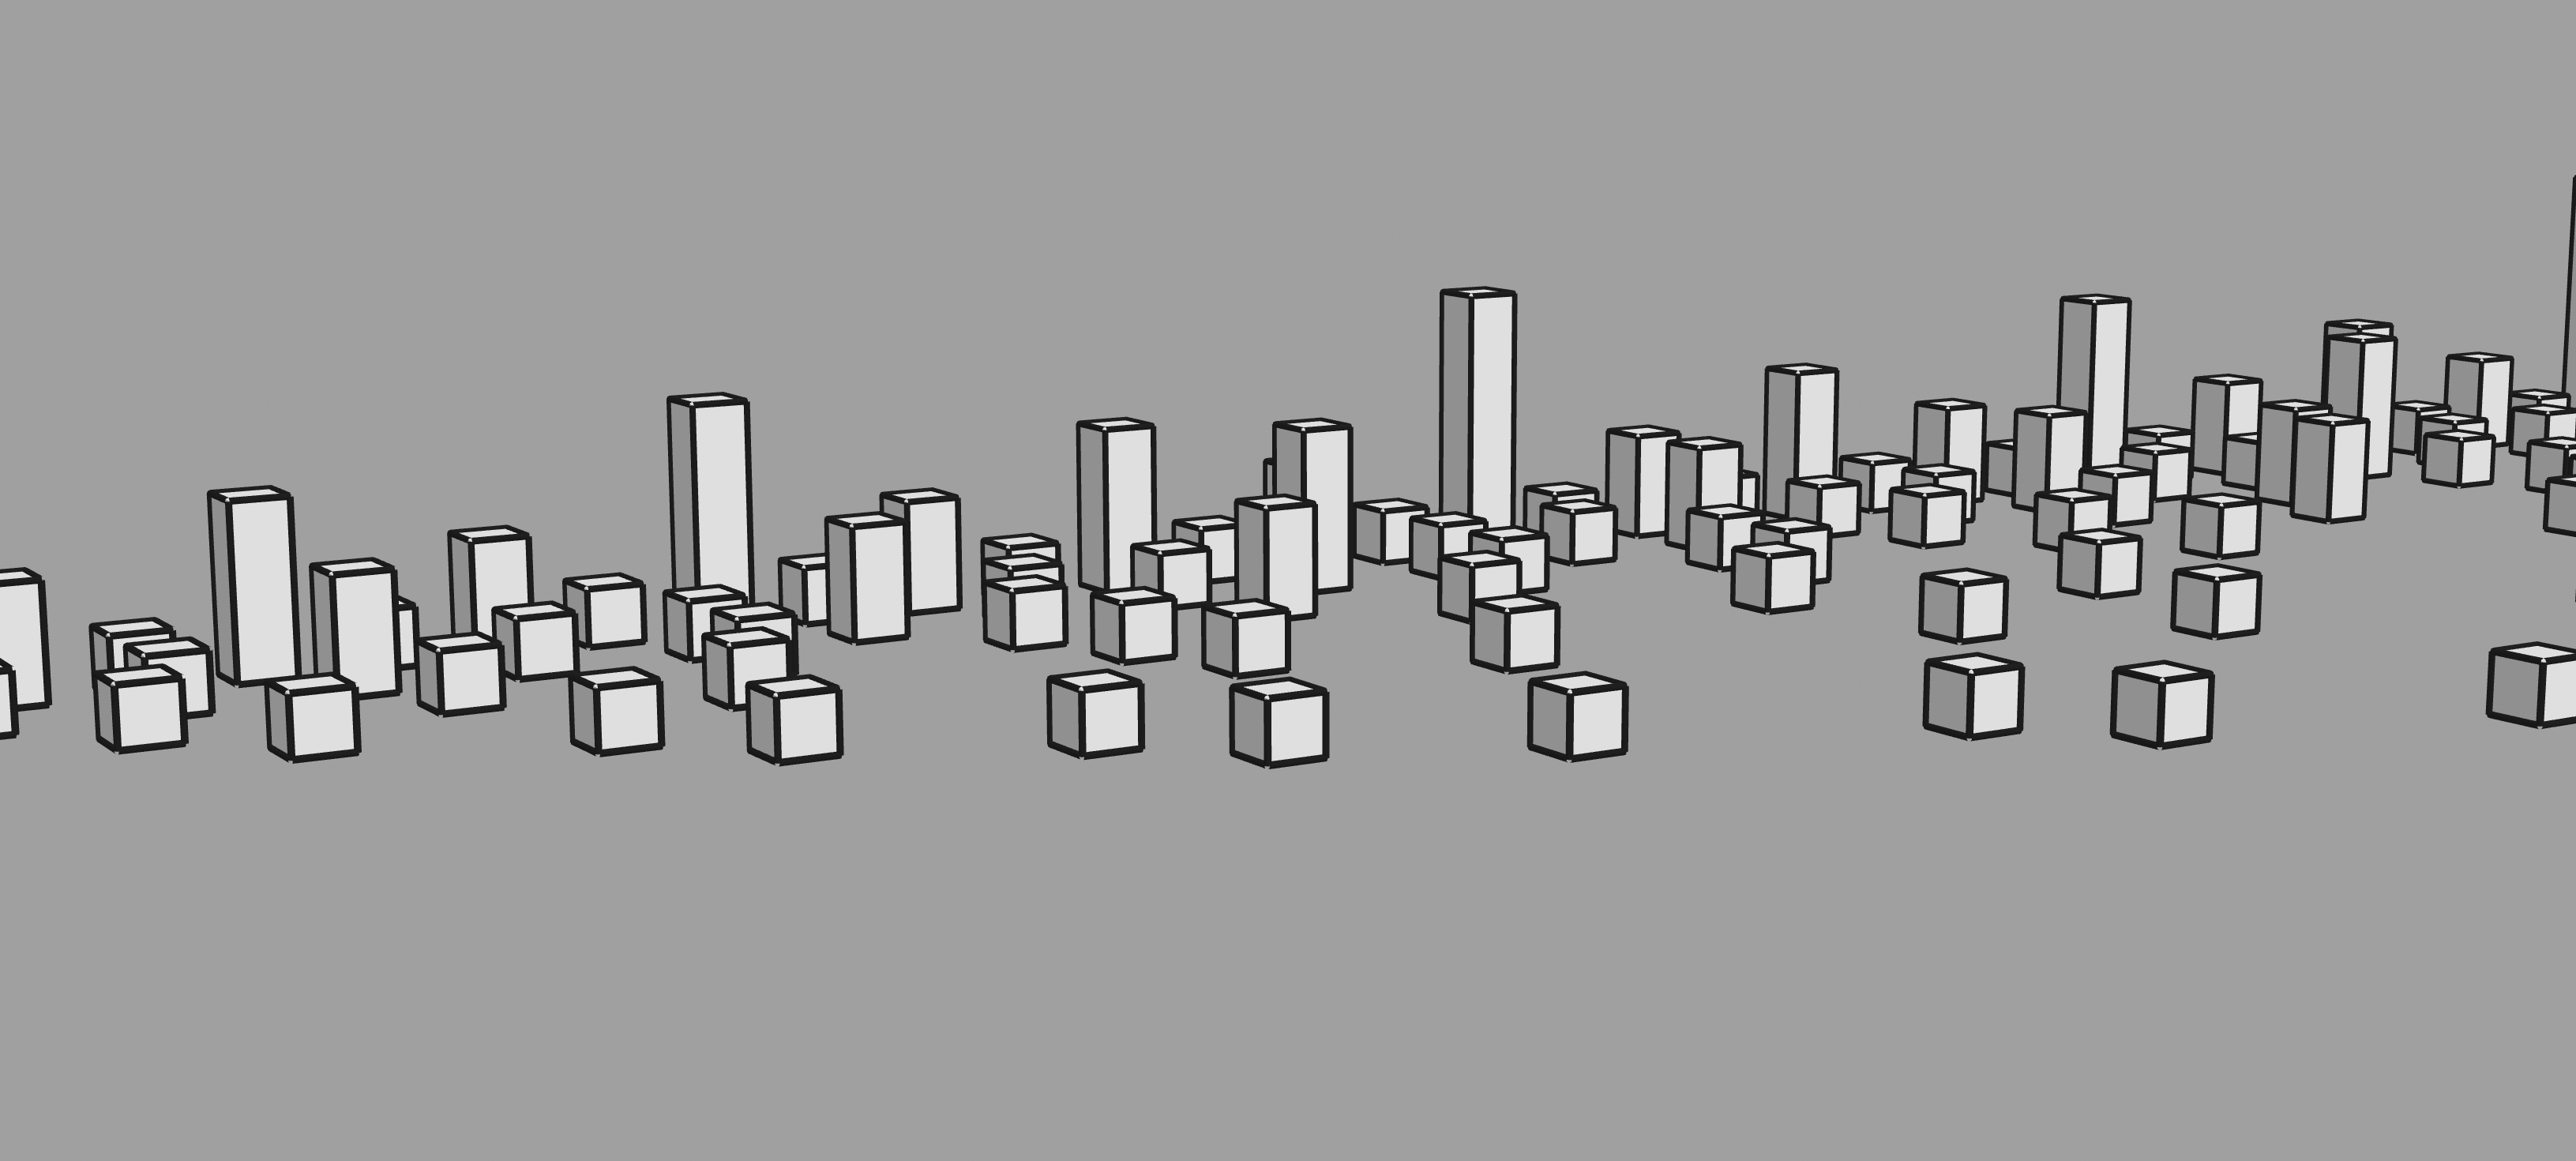 Computer generated illustration of Number City, showing towers of different heights